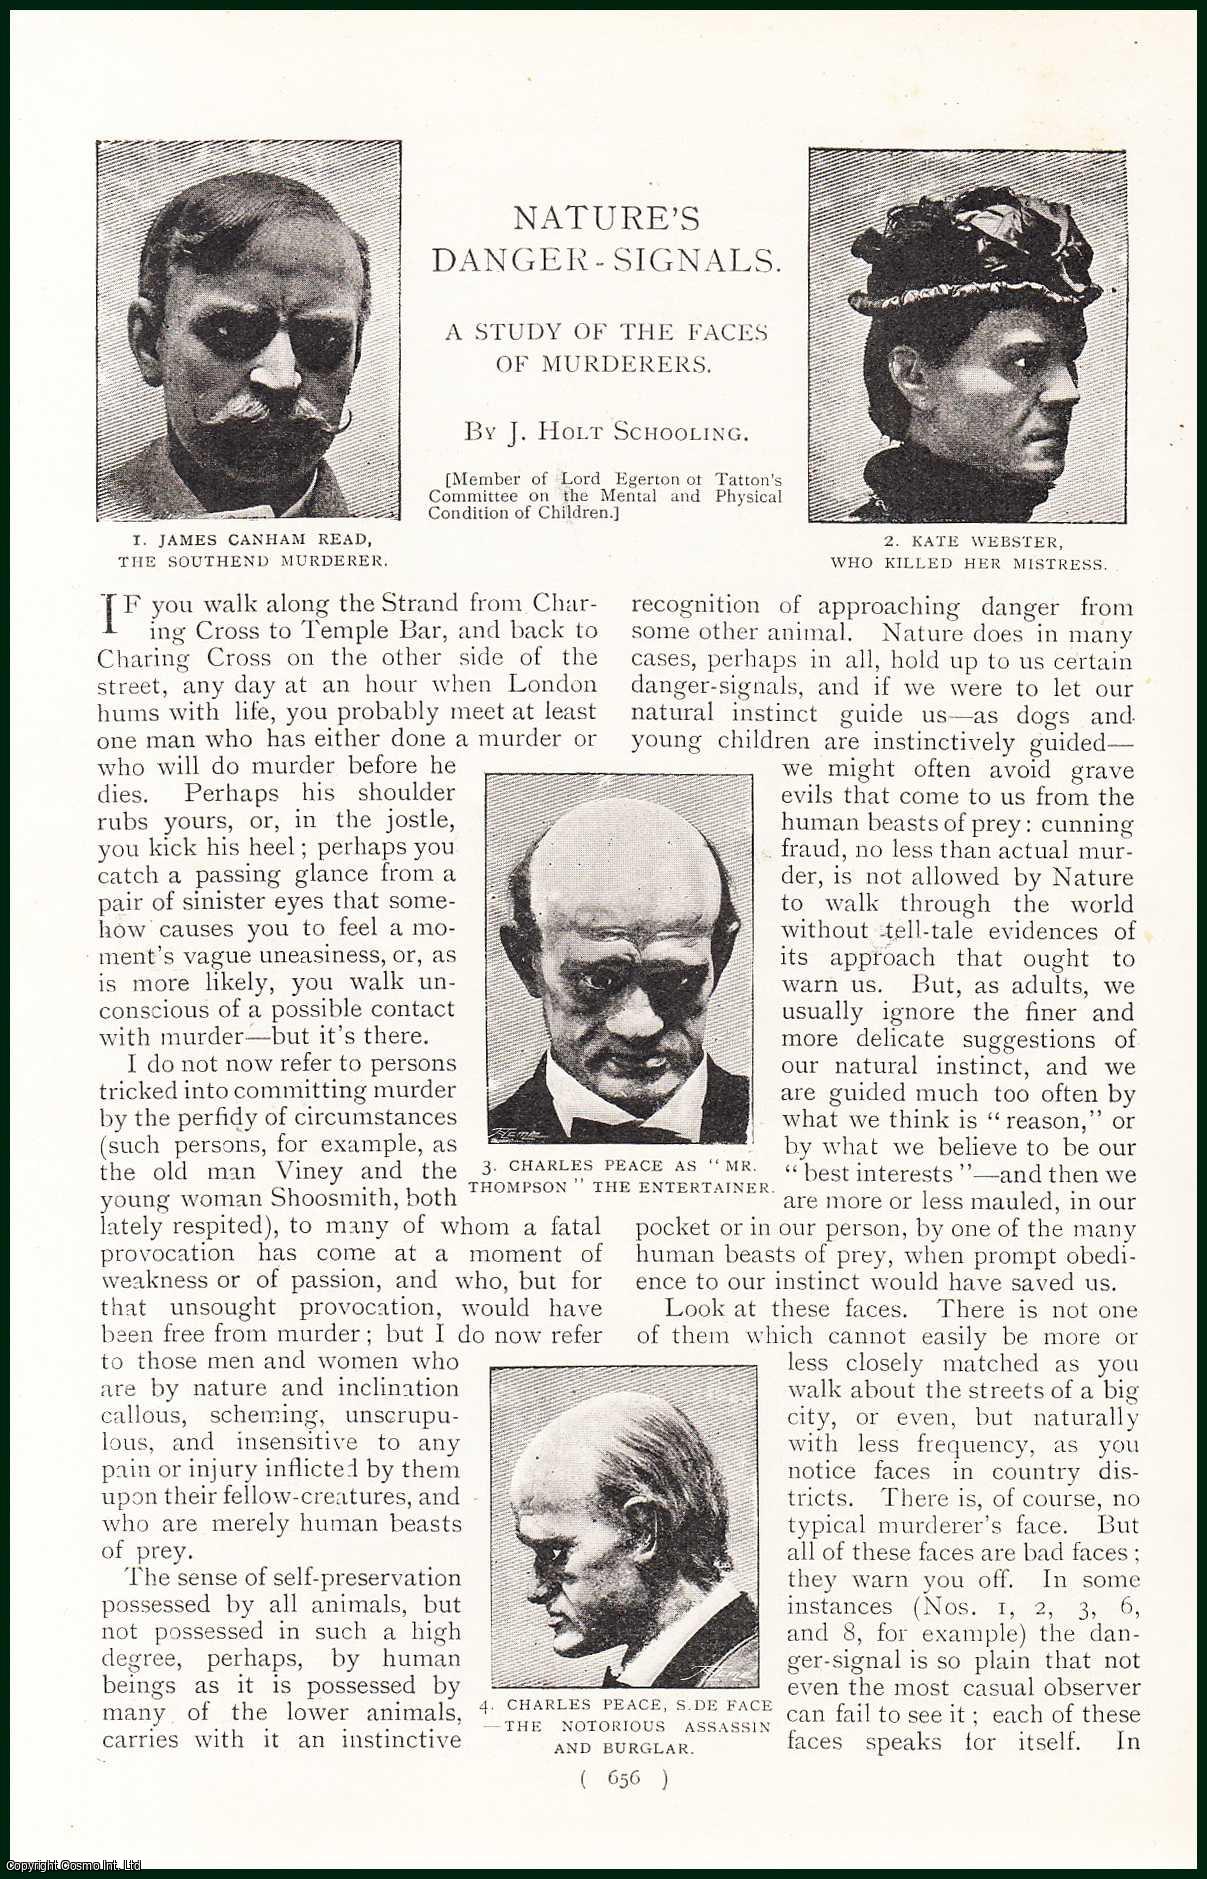 J. Holt Schooling - Henry Fowler ; Albert Milsom, The Muswell Hill Murderers ; Percy Lefroy Mapleton, Who Killed Mr. Gold on The Brighton Line & others : Nature's Danger Signals. A Study of the Faces of Murderers, illustrated with Photographs taken from Models in Madame Tussaud's Exhibition. An uncommon original article from the Harmsworth London Magazine, 1898.